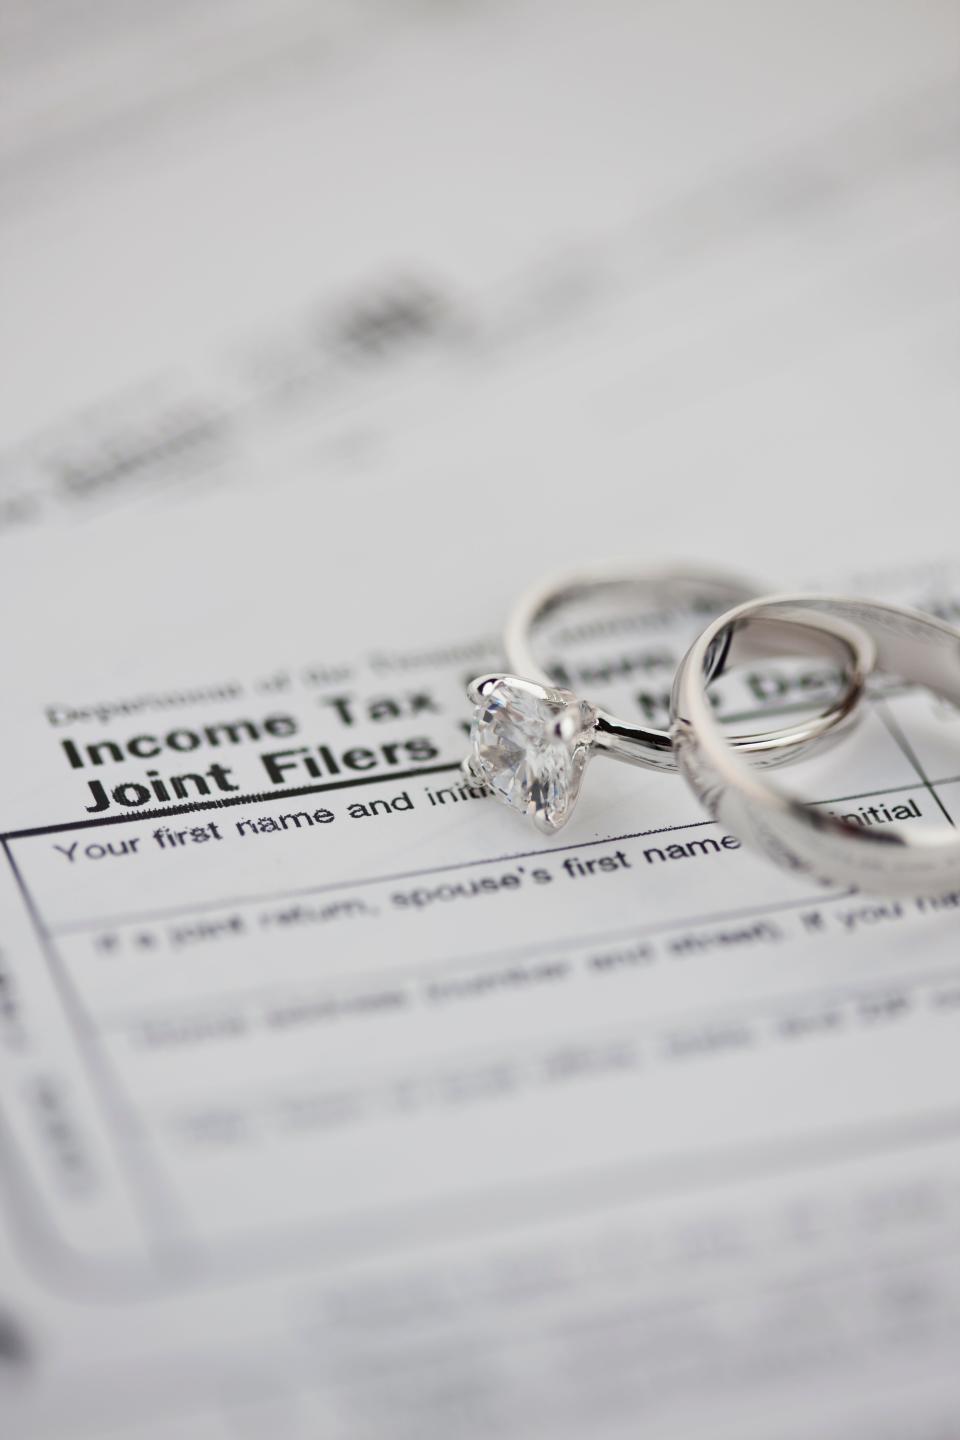 Tax forms with wedding rings.